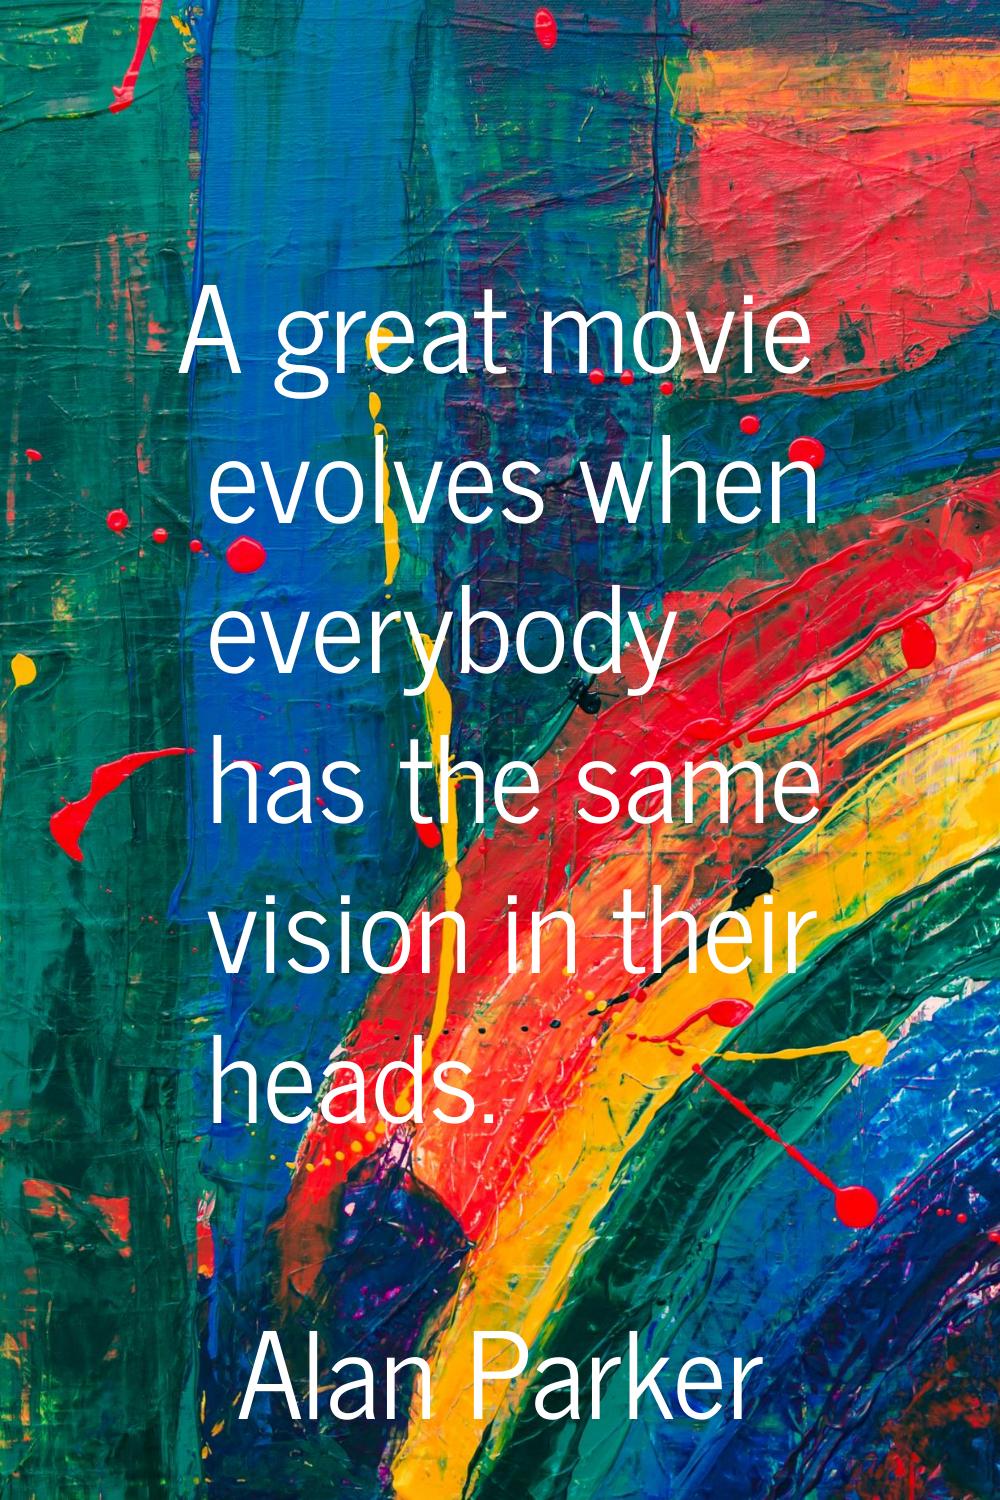 A great movie evolves when everybody has the same vision in their heads.